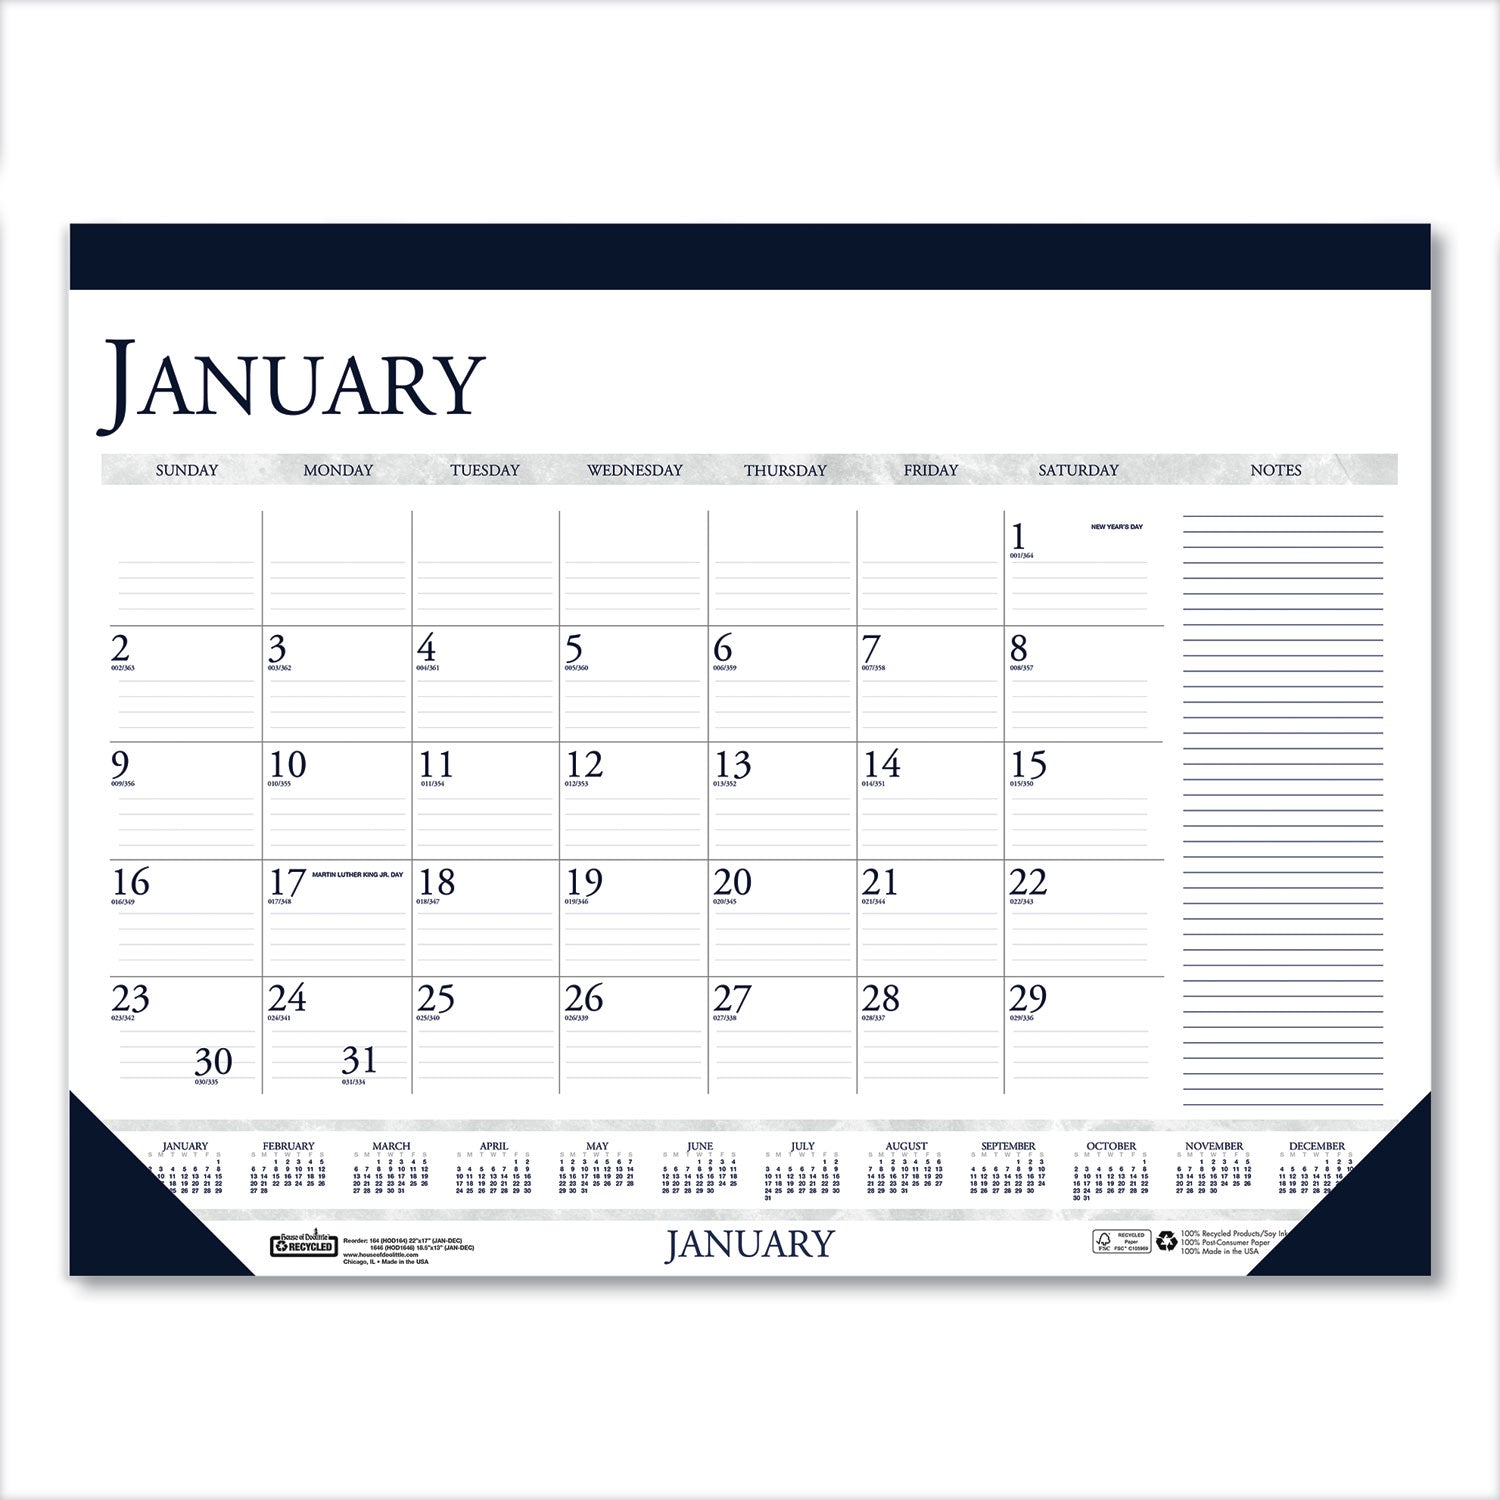 recycled-two-color-monthly-desk-pad-calendar-with-notes-section-185-x-13-blue-binding-corners-12-month-jan-dec-2024_hod1646 - 1